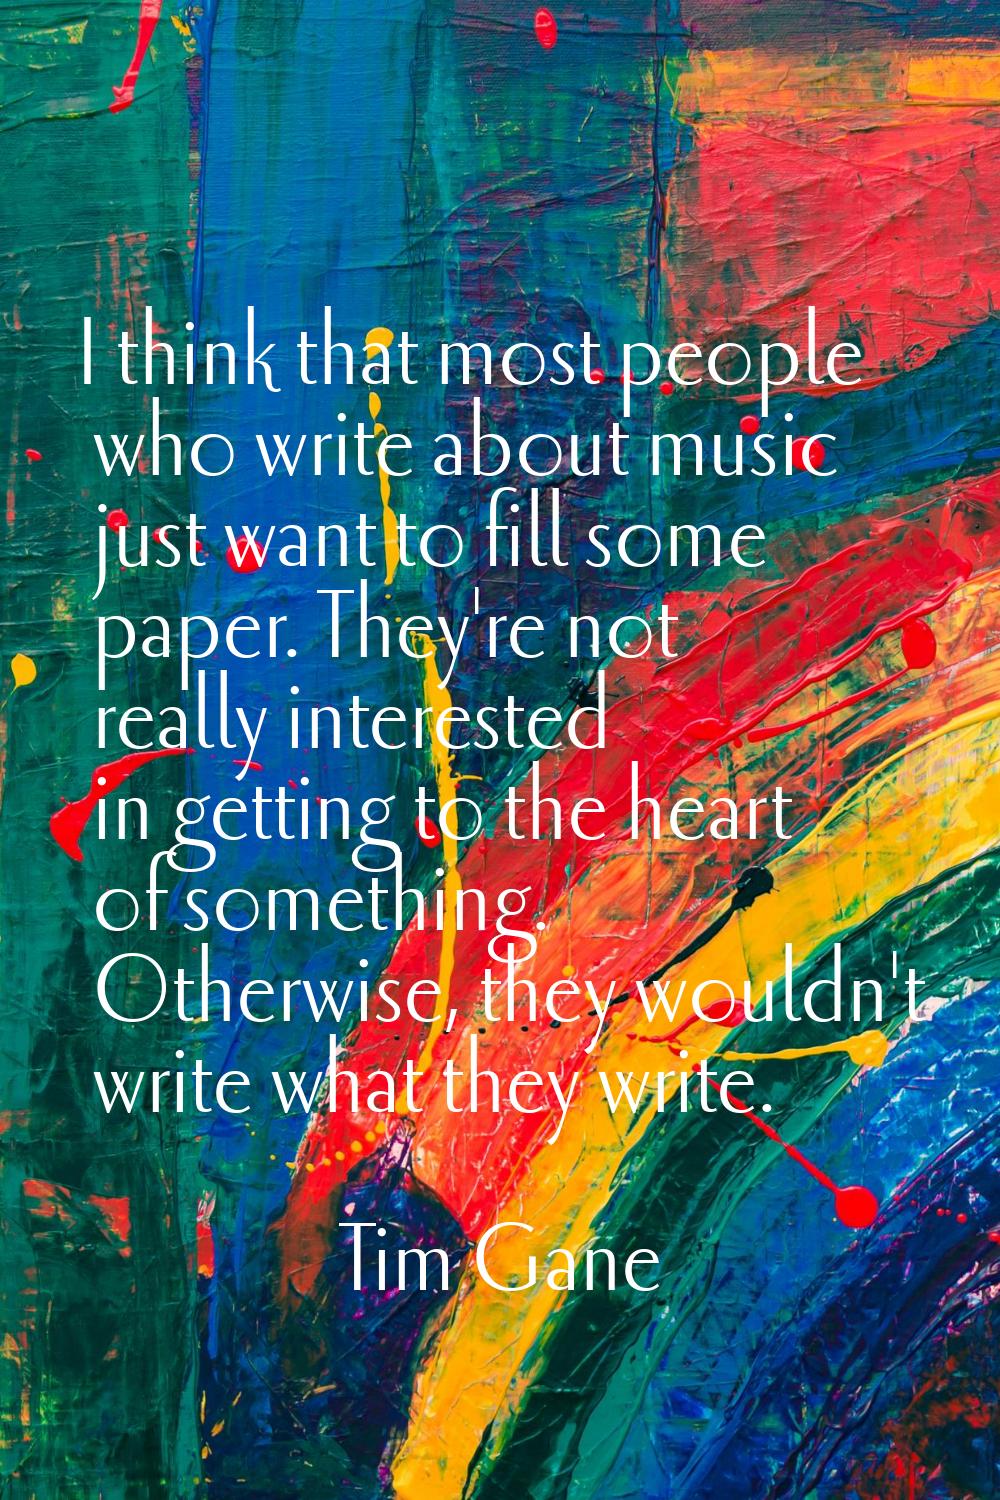 I think that most people who write about music just want to fill some paper. They're not really int